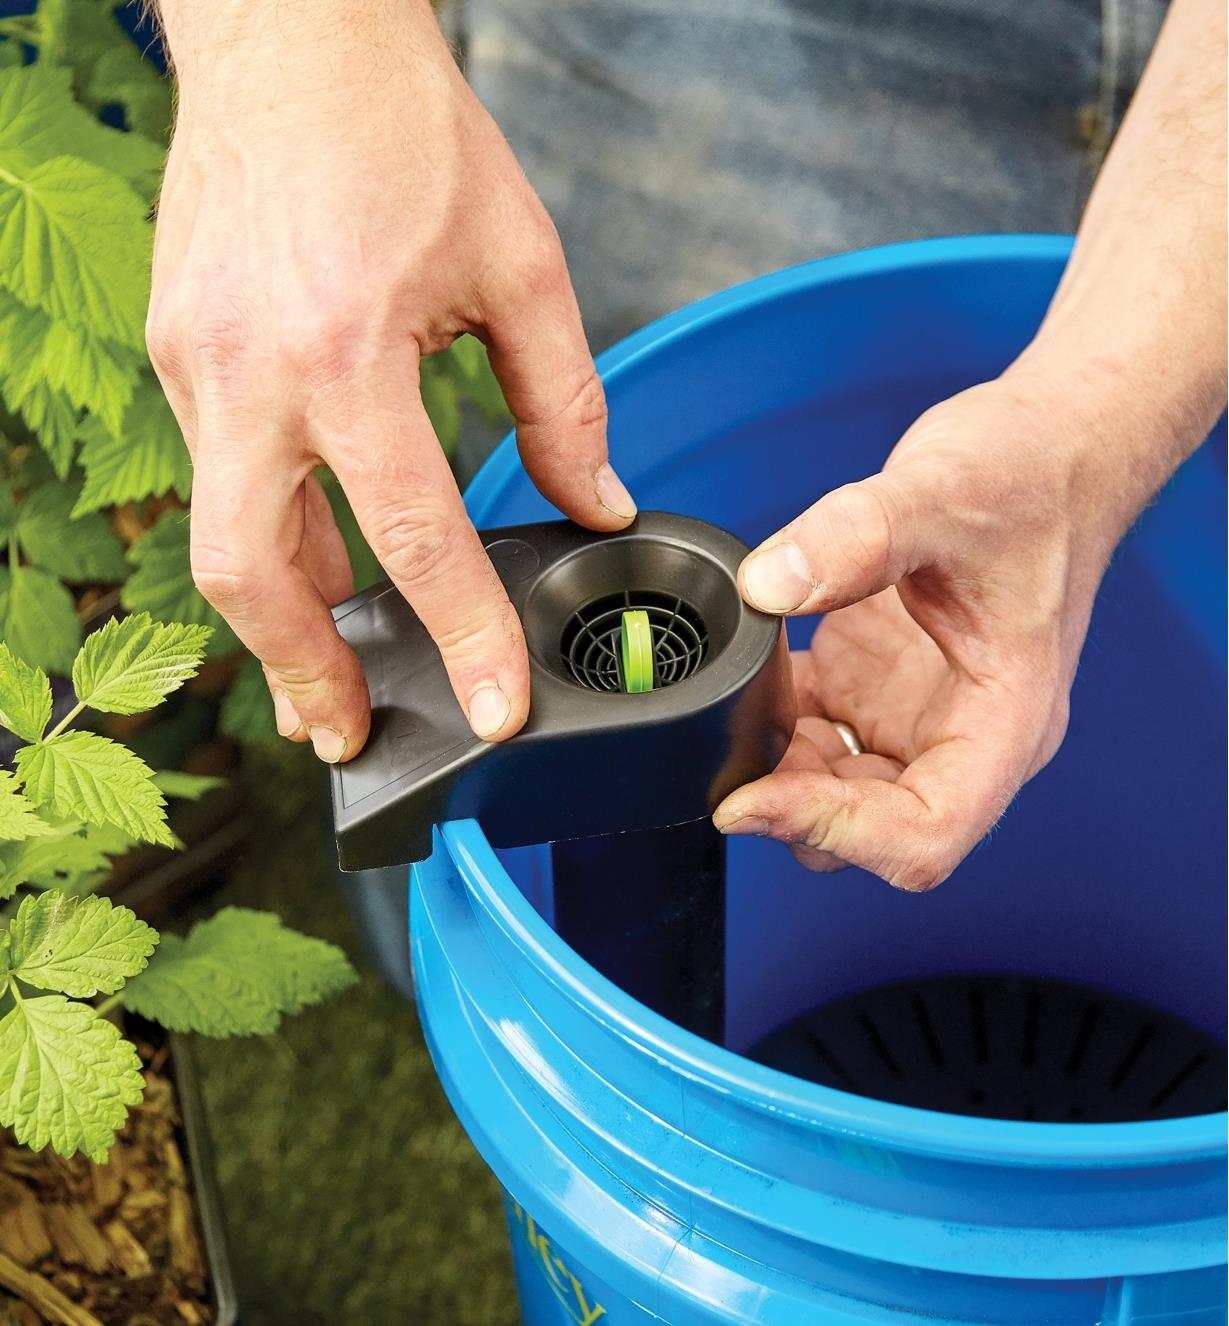 Clipping a bracket with a green tab in its center to the top of the bucket